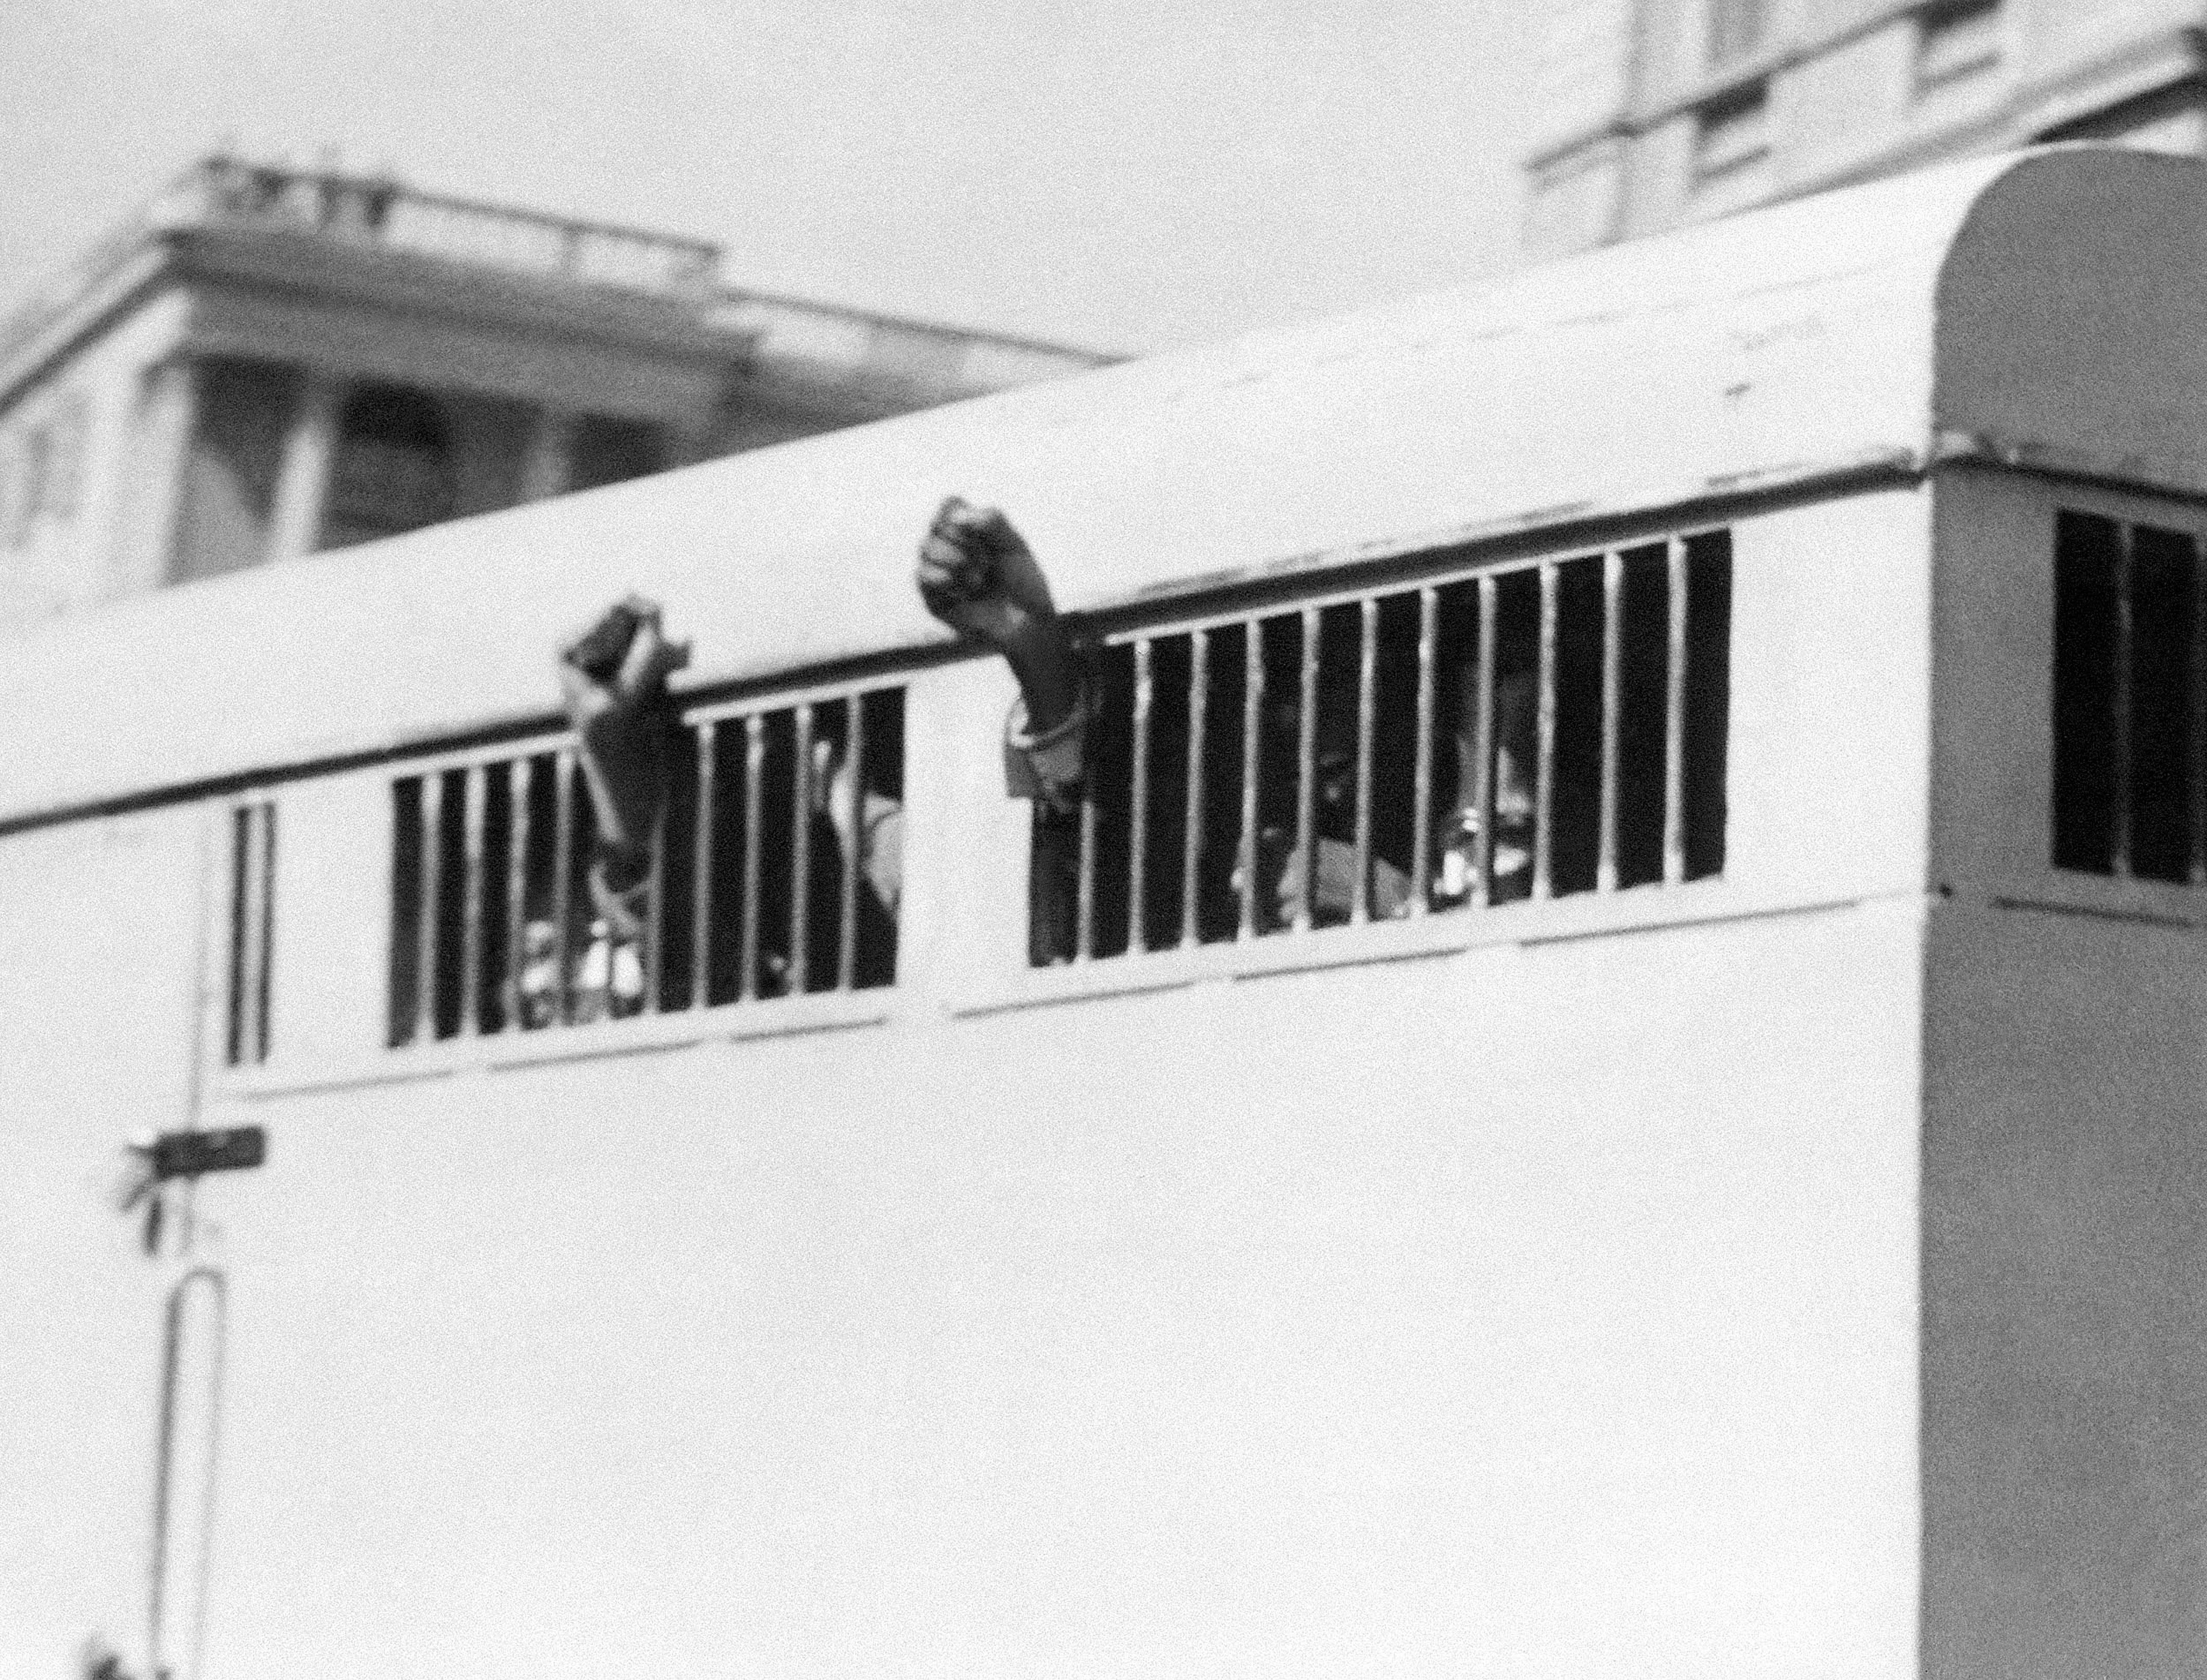 Eight men, among them anti-apartheid leader and African National Congress (ANC) member Nelson Mandela, sentenced to life imprisonment in the Rivonia trial leave the Palace of Justice in Pretoria 12 June 1964 with their fists raised in defiance through the barred windows of the prison car.